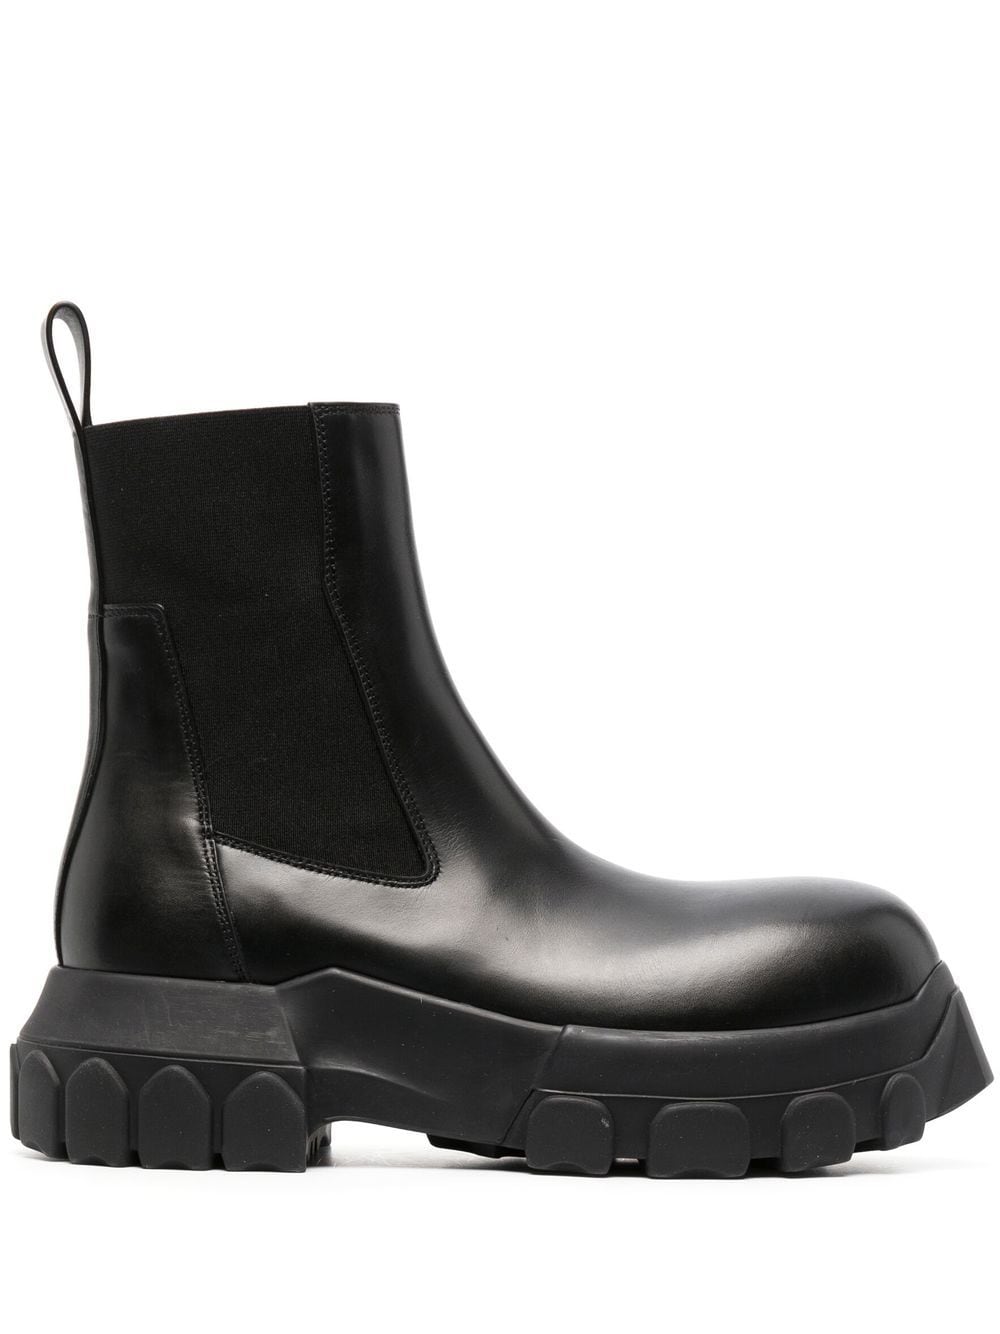 RICK OWENS Women Beatle Bozo Tractor Calf Leather Boots